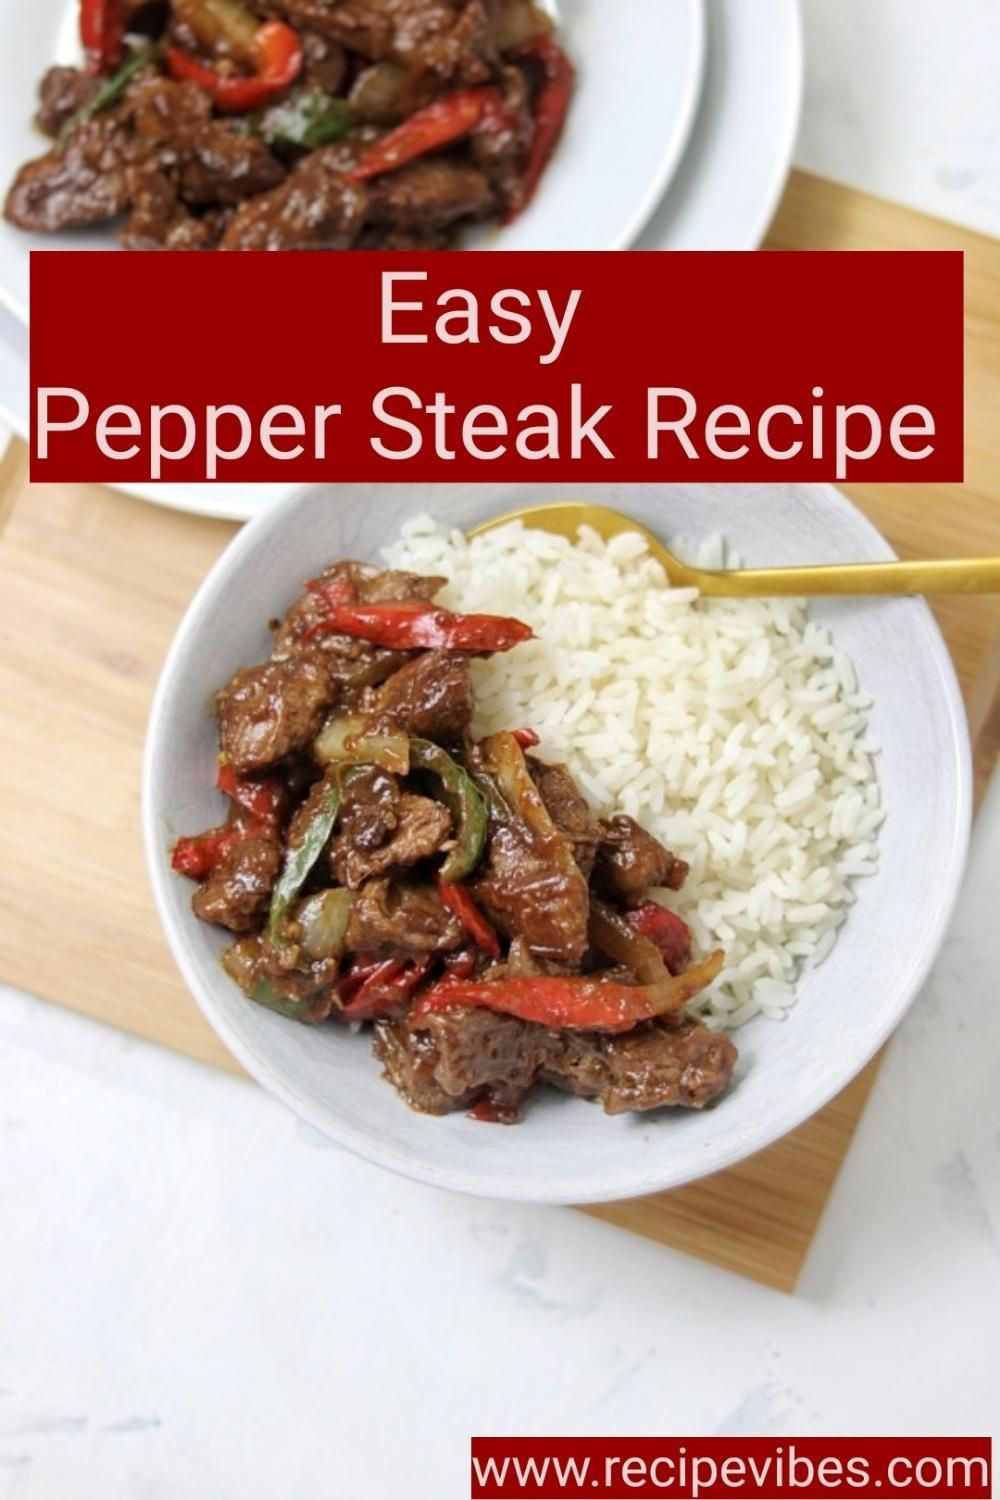 Authentic Chinese Pepper Steak Recipes
 Chinese Pepper Steak Recipe Recipe in 2020